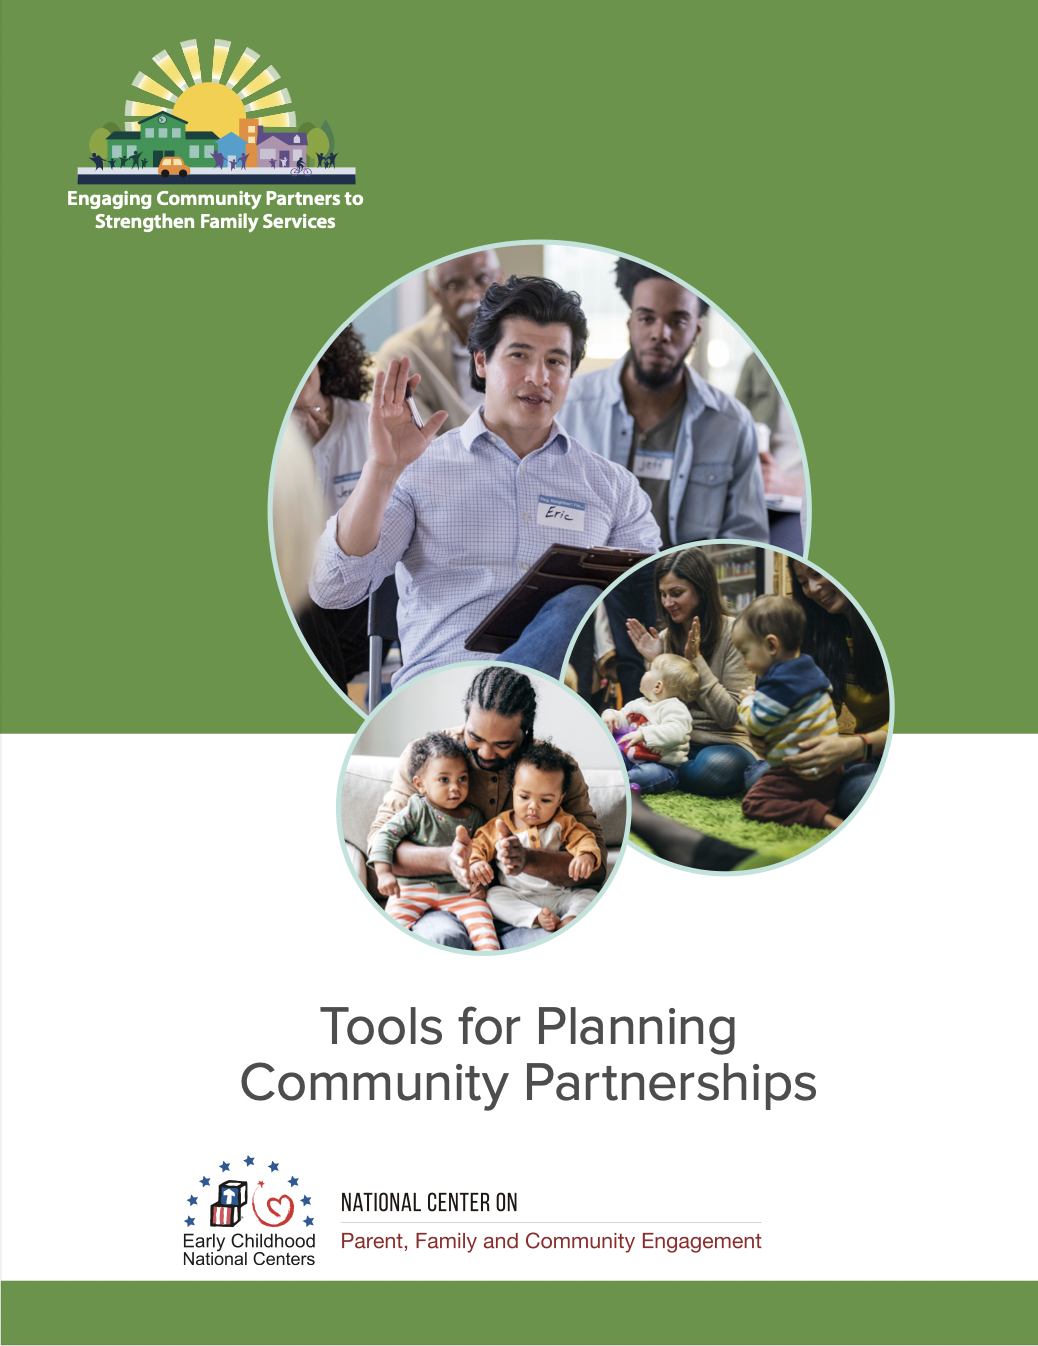 Tools for Planning Community Partnerships